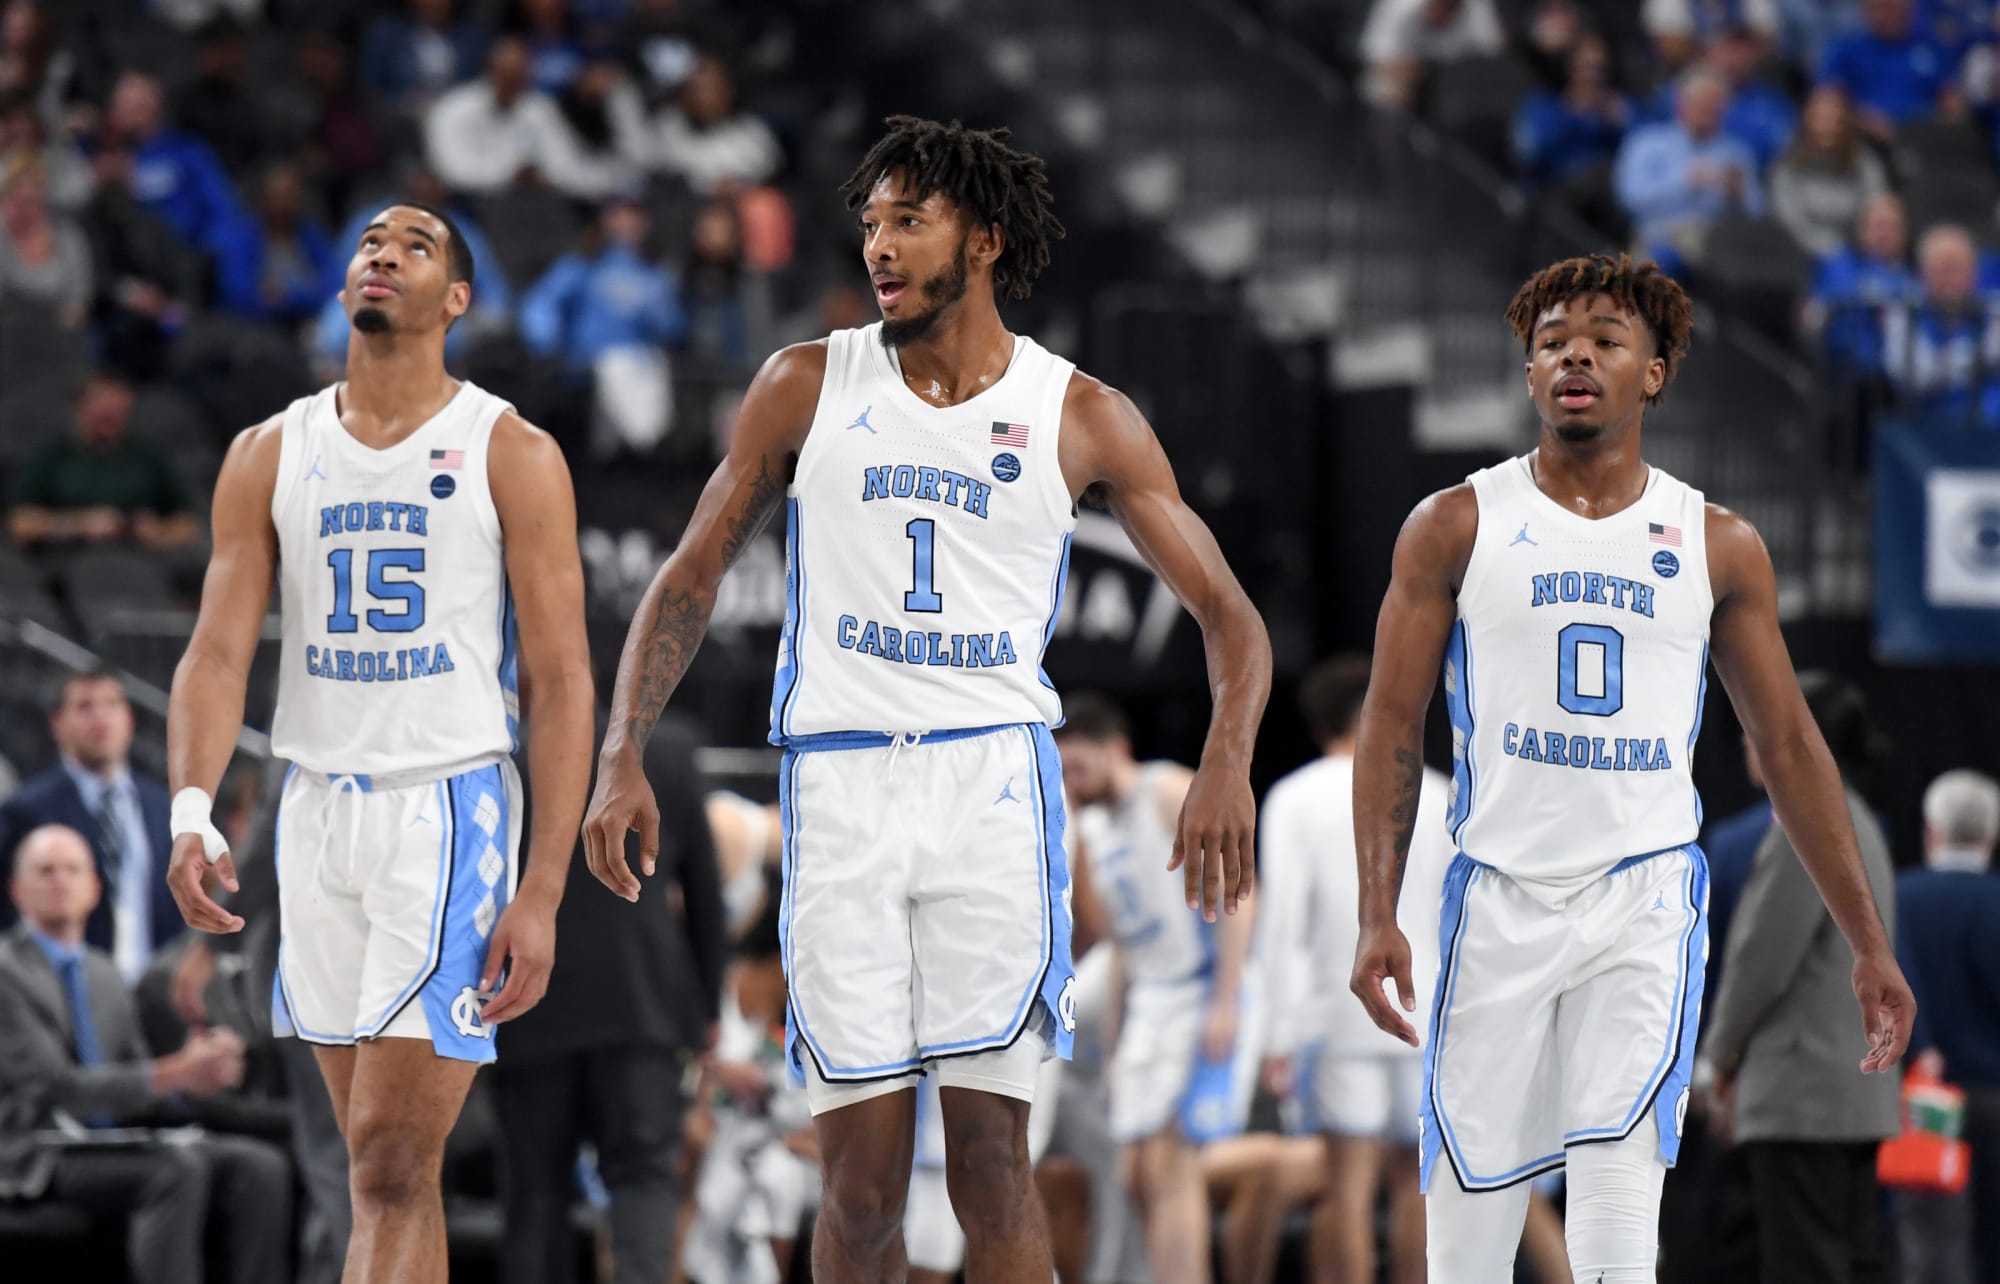 UNC Basketball: Tar Heels' projected 2020-21 starting lineup - Page 2